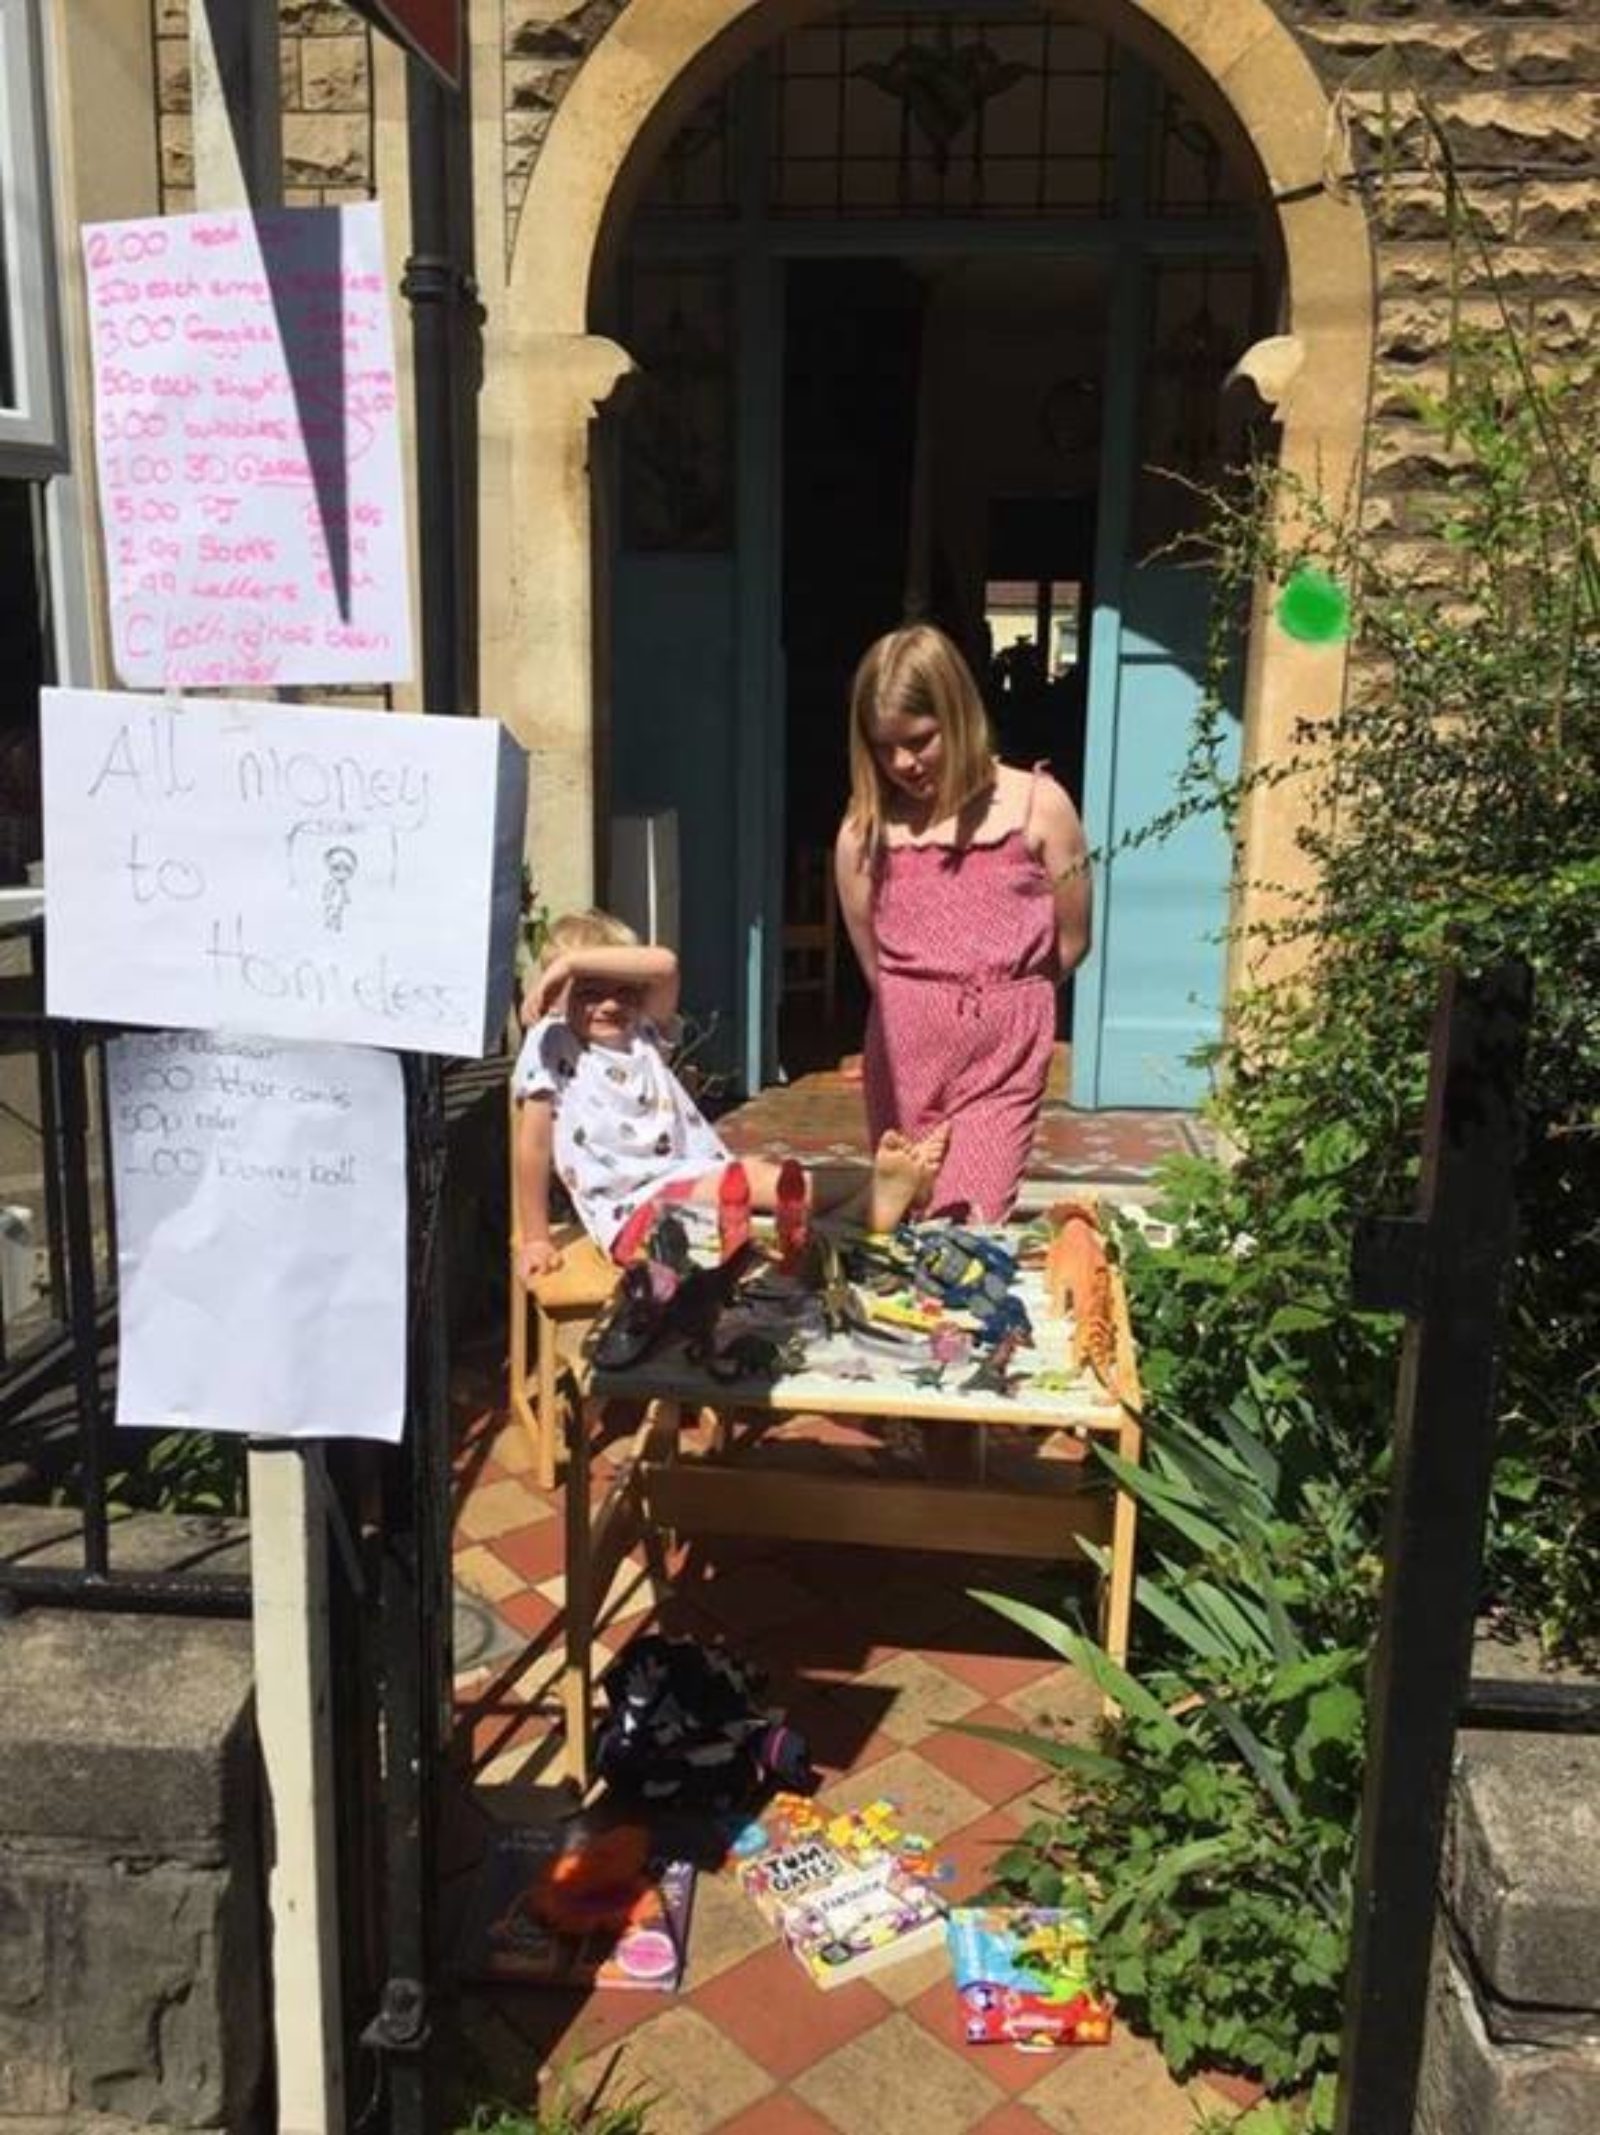 A young constituent raising money to help combat homelessness.